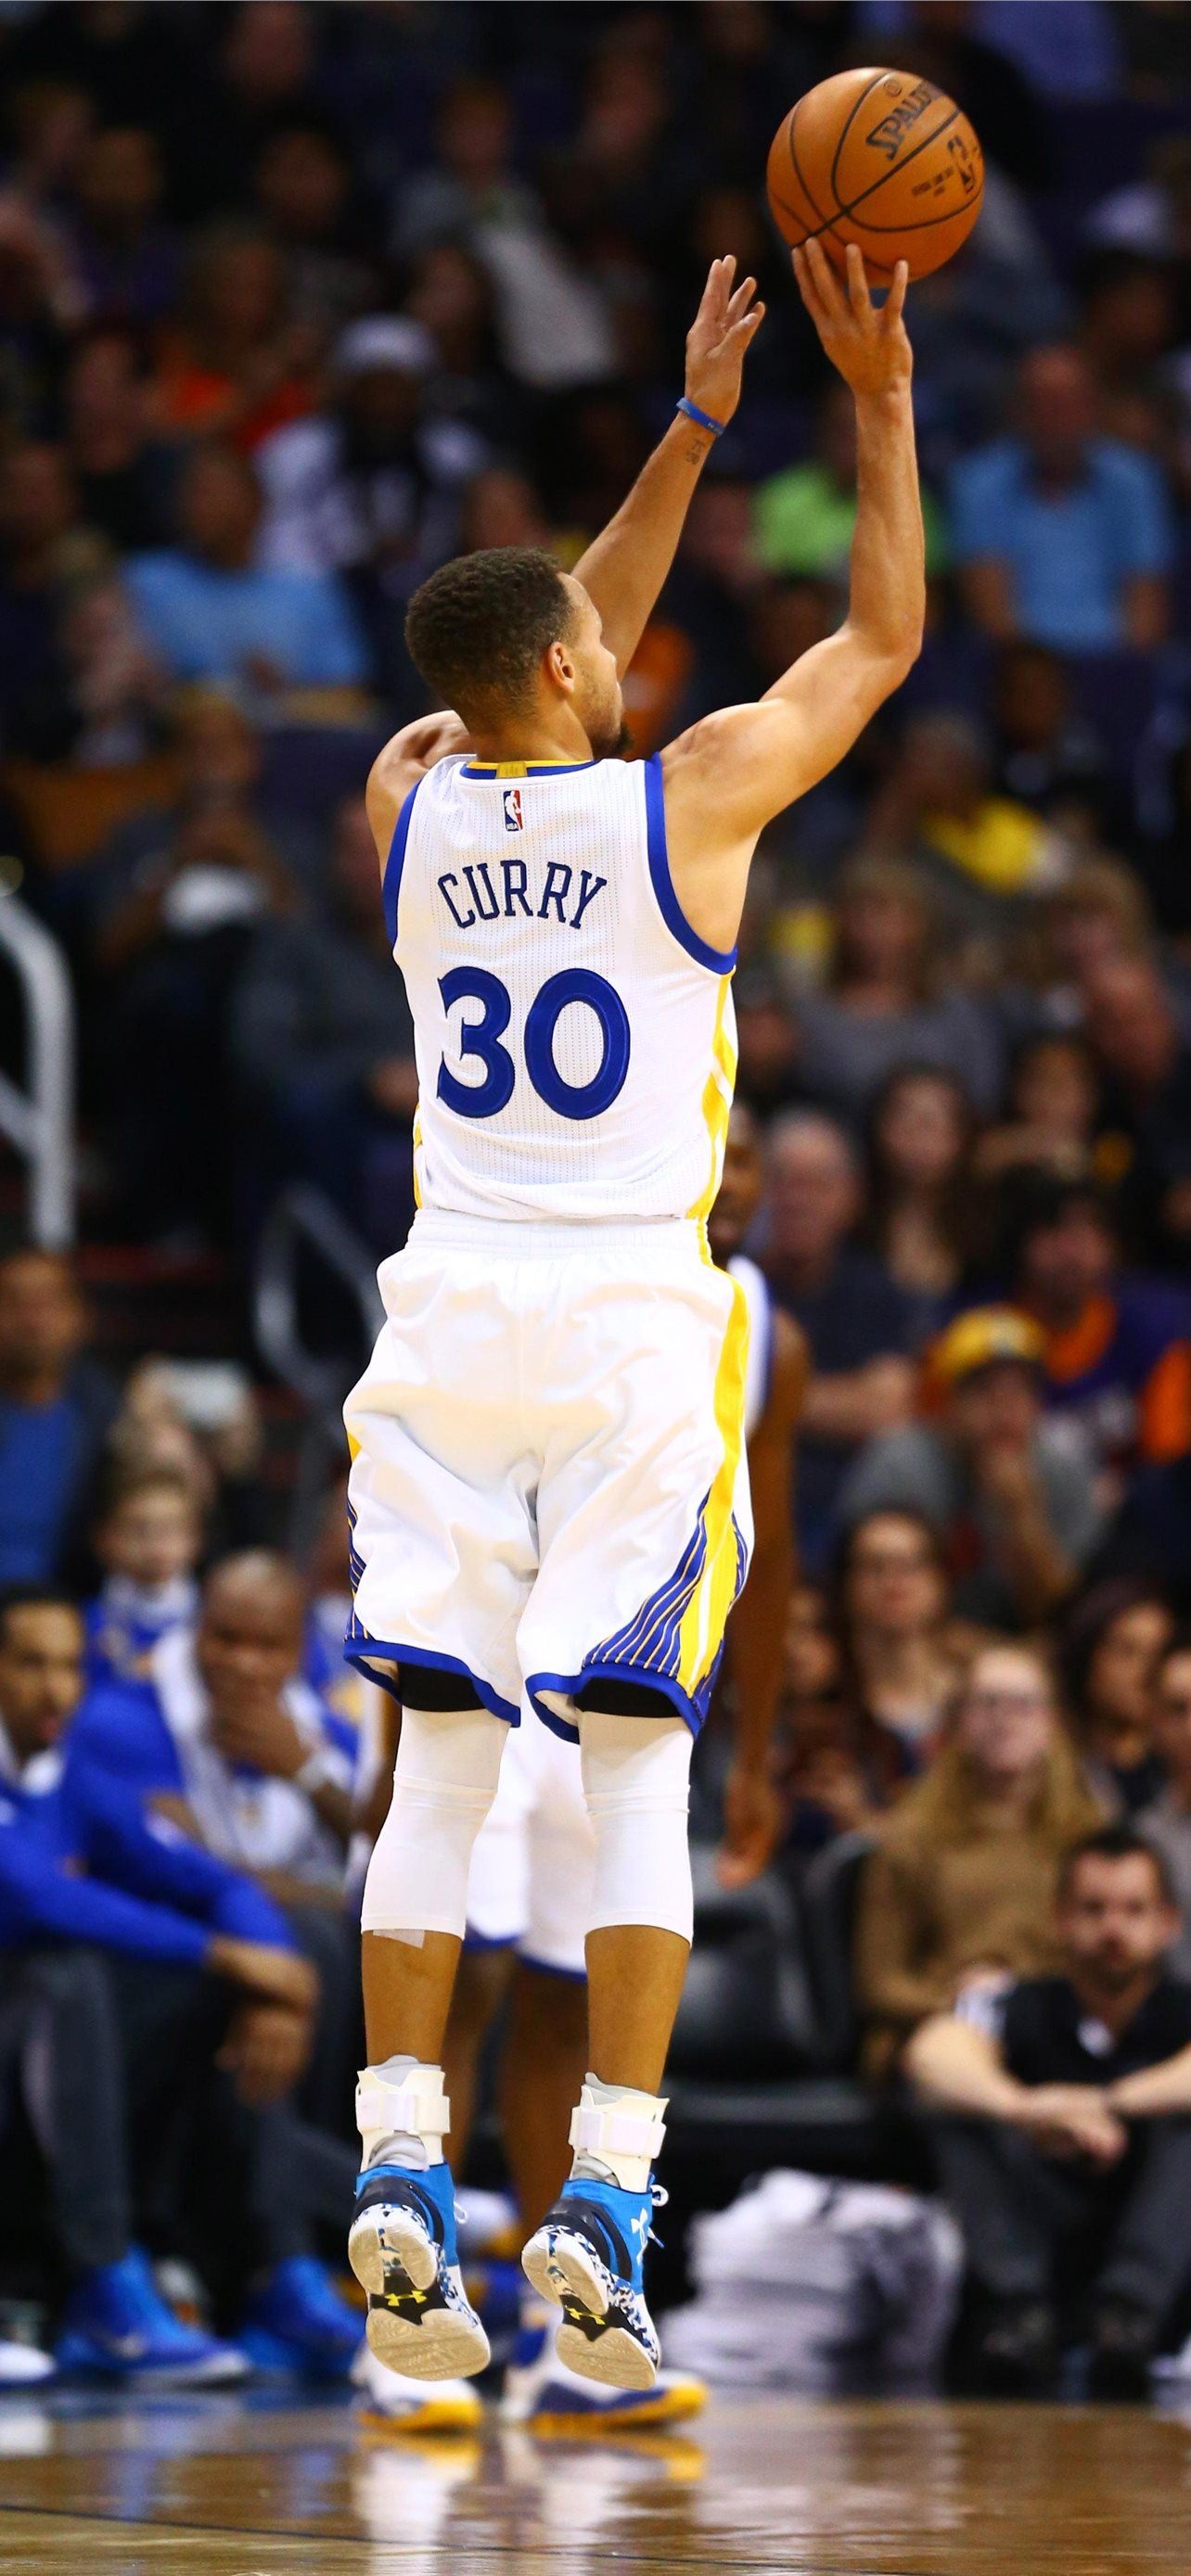 Stephen Curry iPhone wallpapers, HD wallpapers, Basketball player, 1290x2780 HD Handy